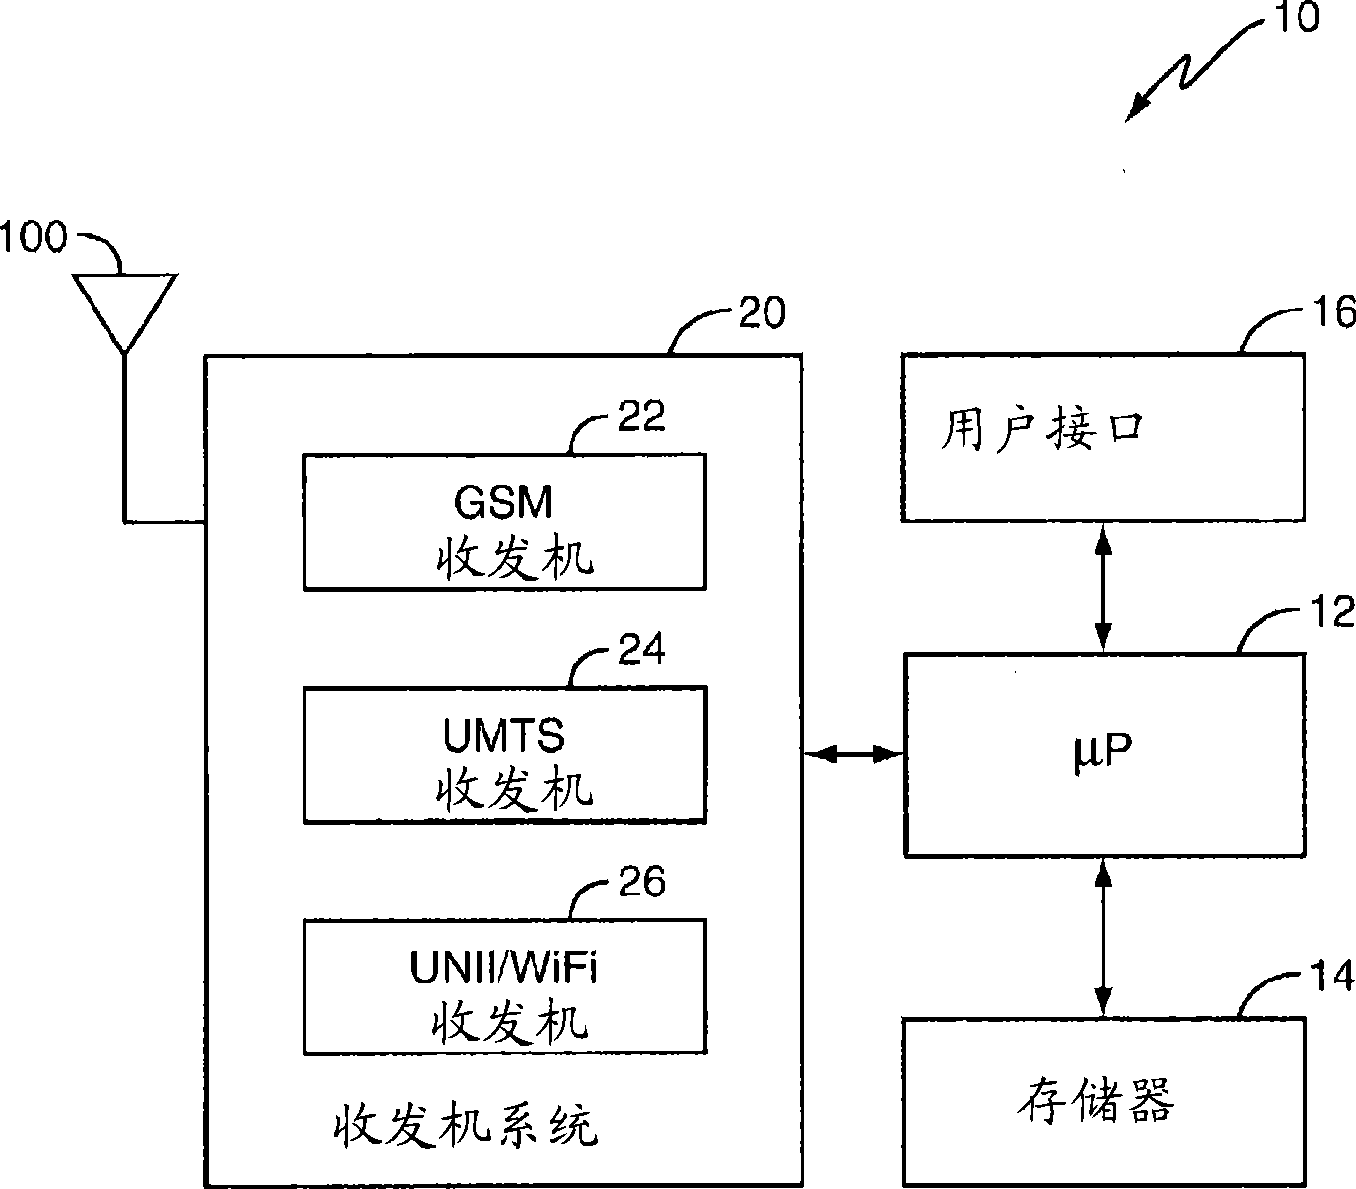 Multi-band antenna for GSM, UMTS, and WIFI applications